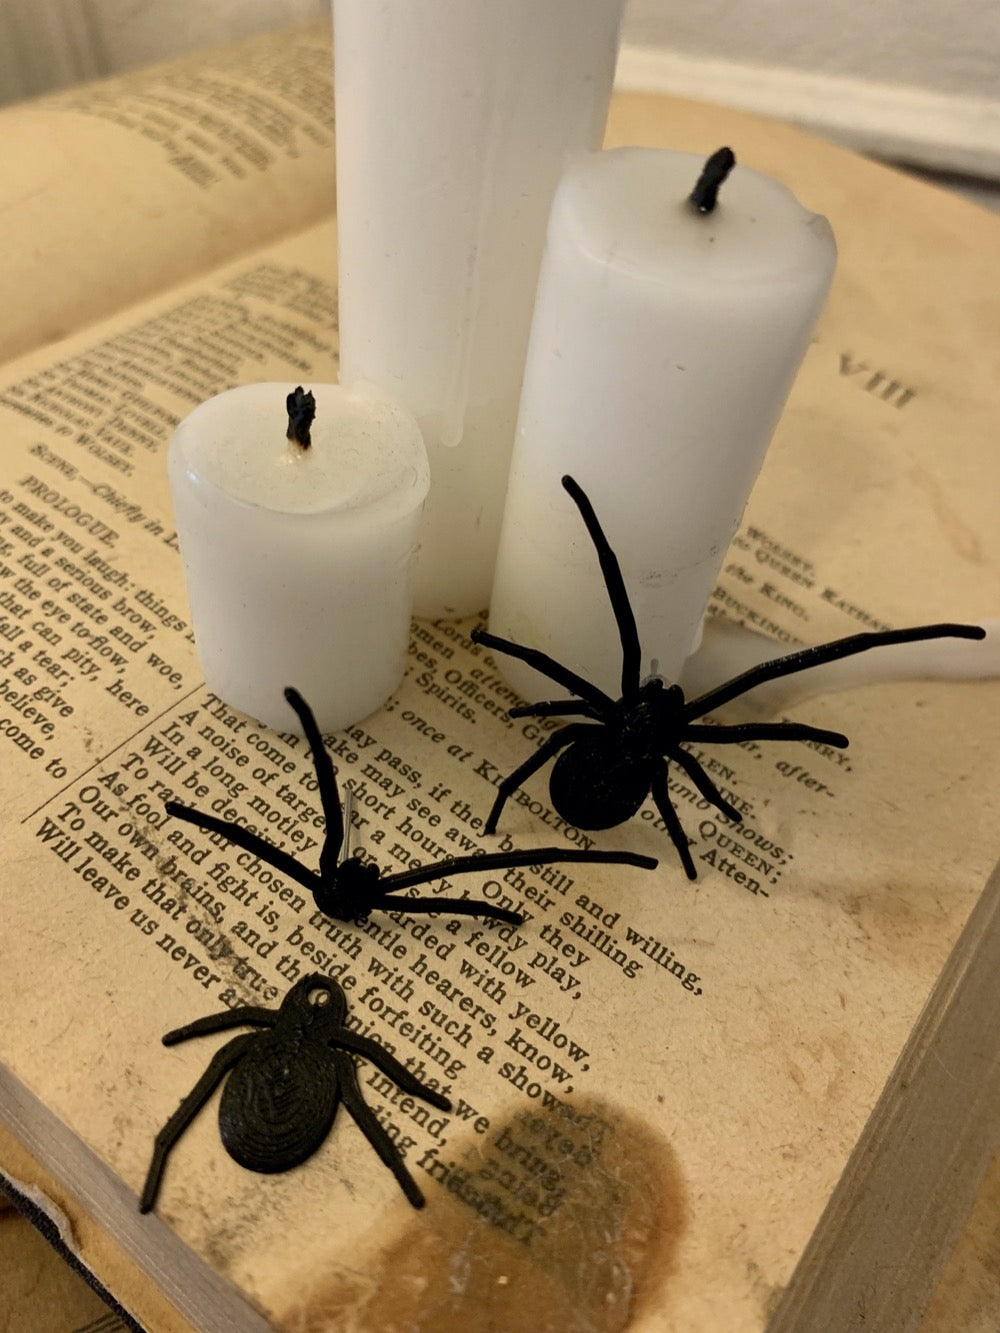 Shown are two black spider earrings that are realistic in their shape. They are worn as front and back earrings. One of the earrings has the two pieces separated to show how they would be then worn on each side of your earlobe. They are pictured crawling up an old book with candles on top to create a spooky Halloween scene.